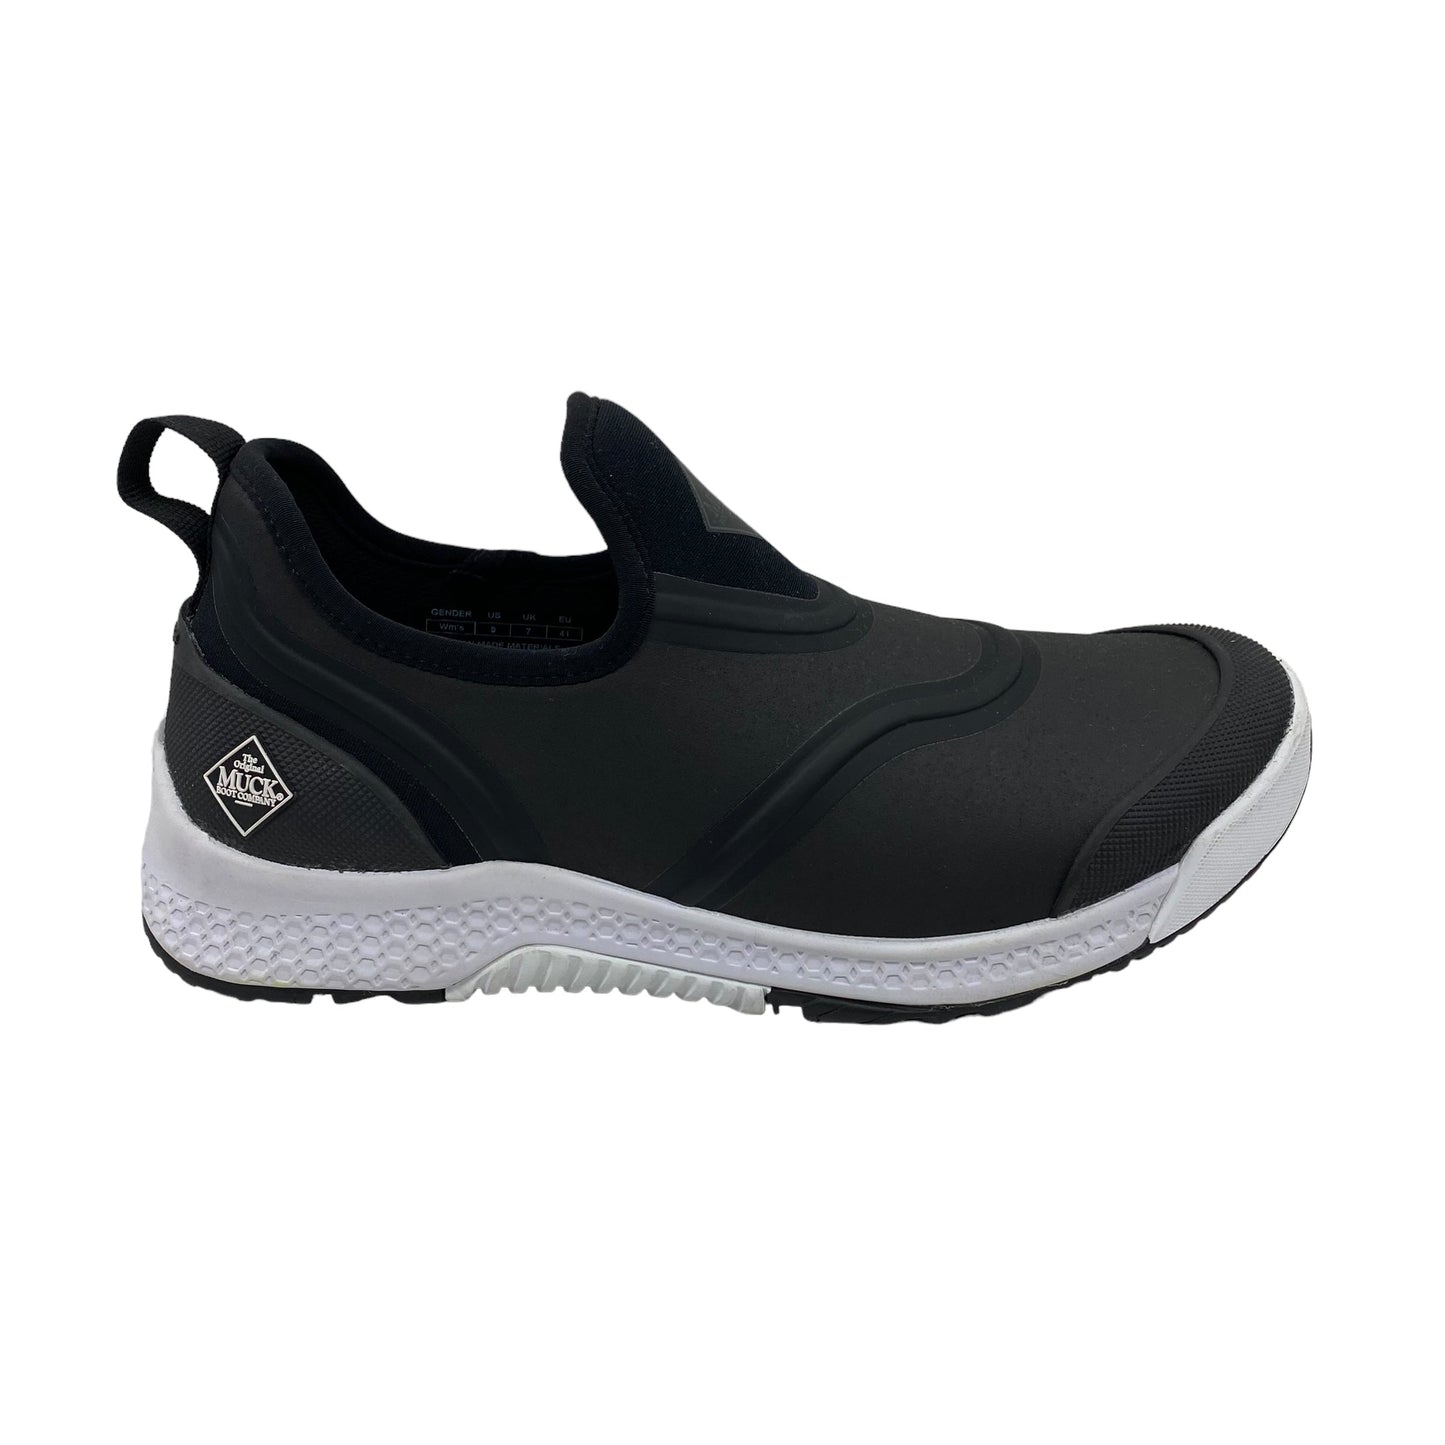 BLACK    CLOTHES MENTOR SHOES HIKING, Size 9